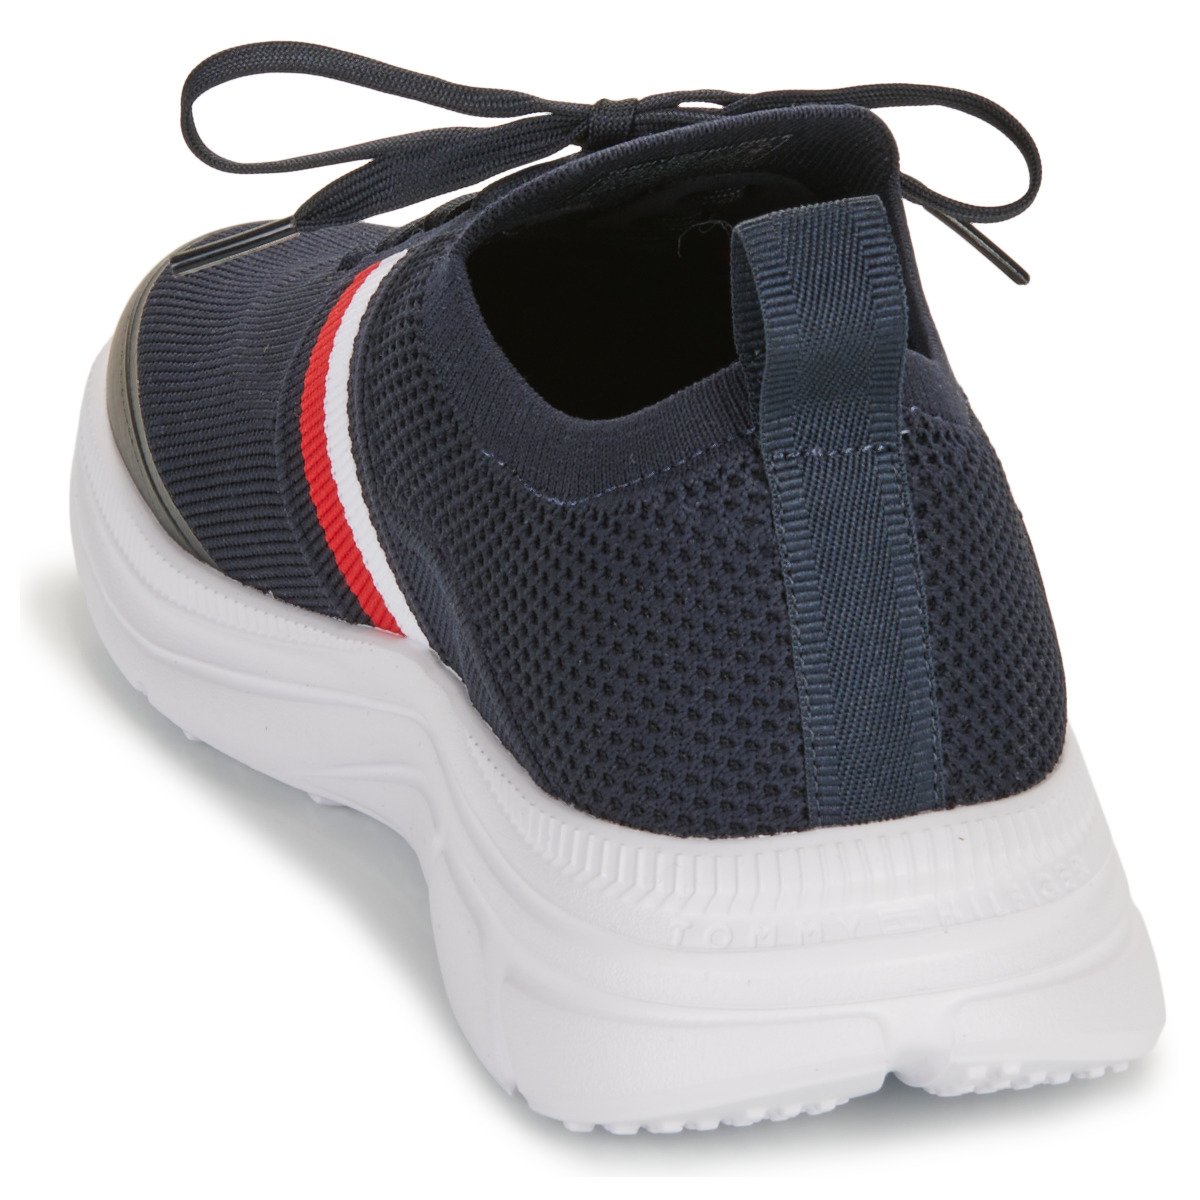 Shoes (Trainers) MODERN RUNNER KNIT STRIPES